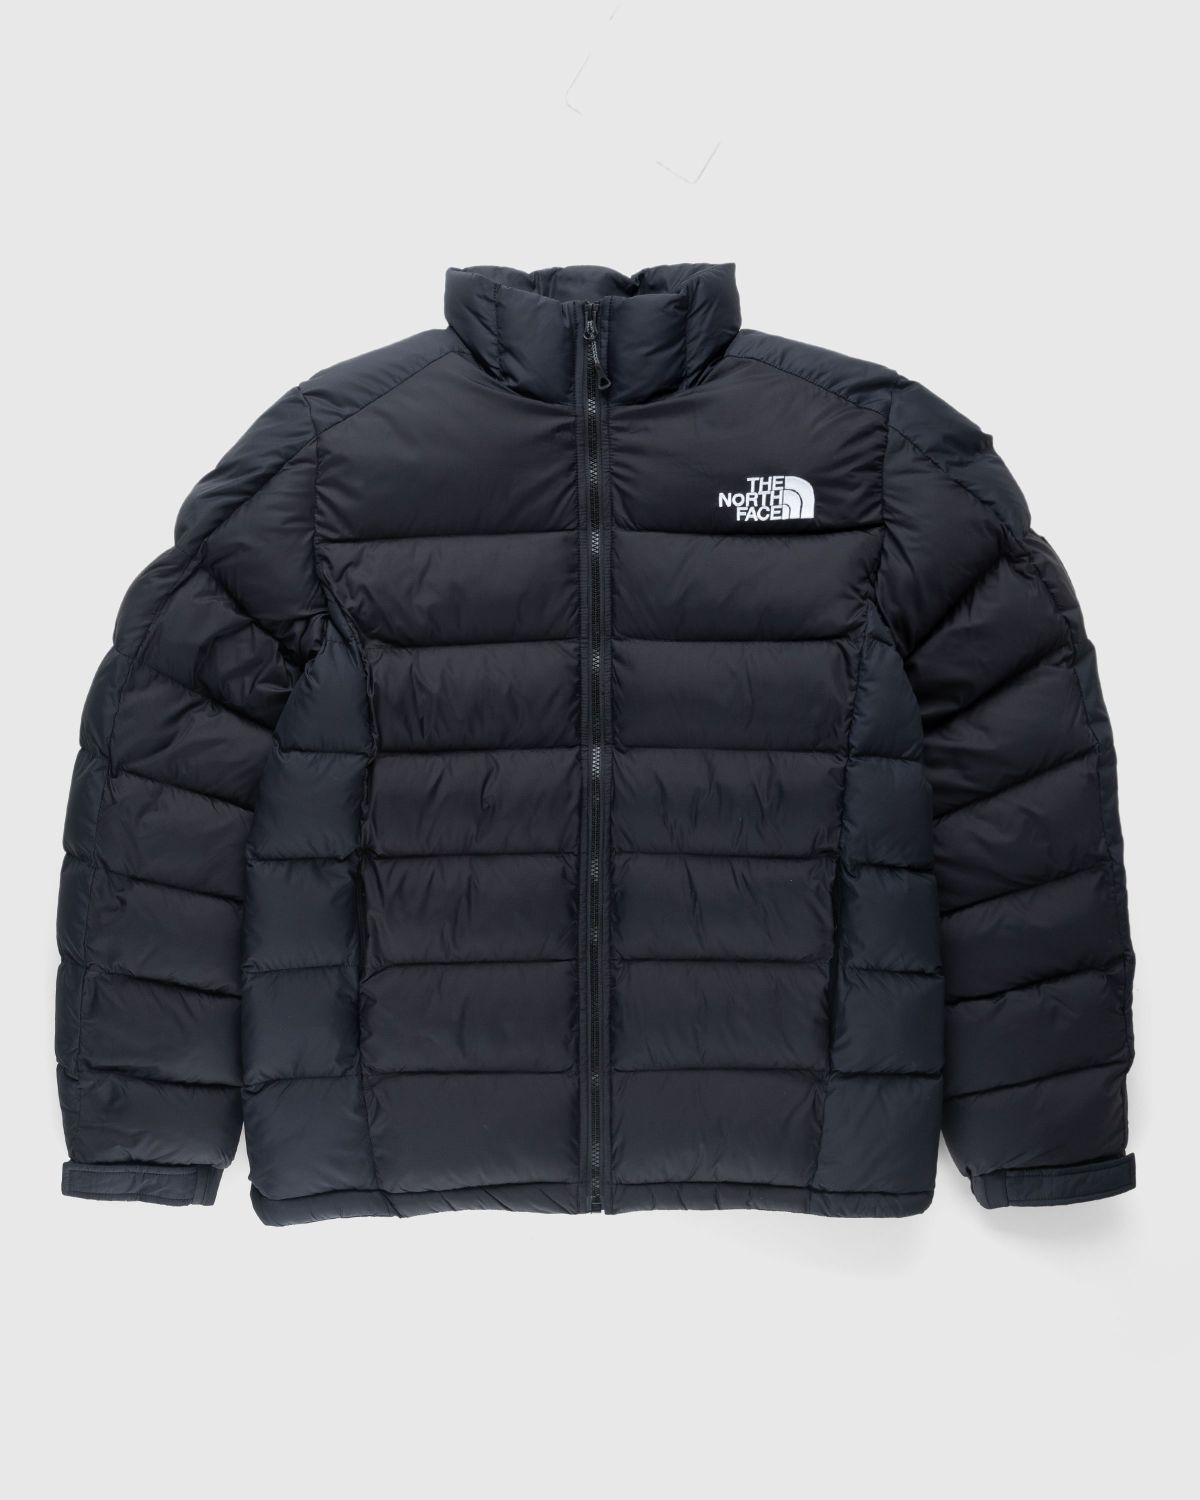 The North Face – Rusta 2.0 Puffer Jacket Black - Outerwear - Black - Image 1